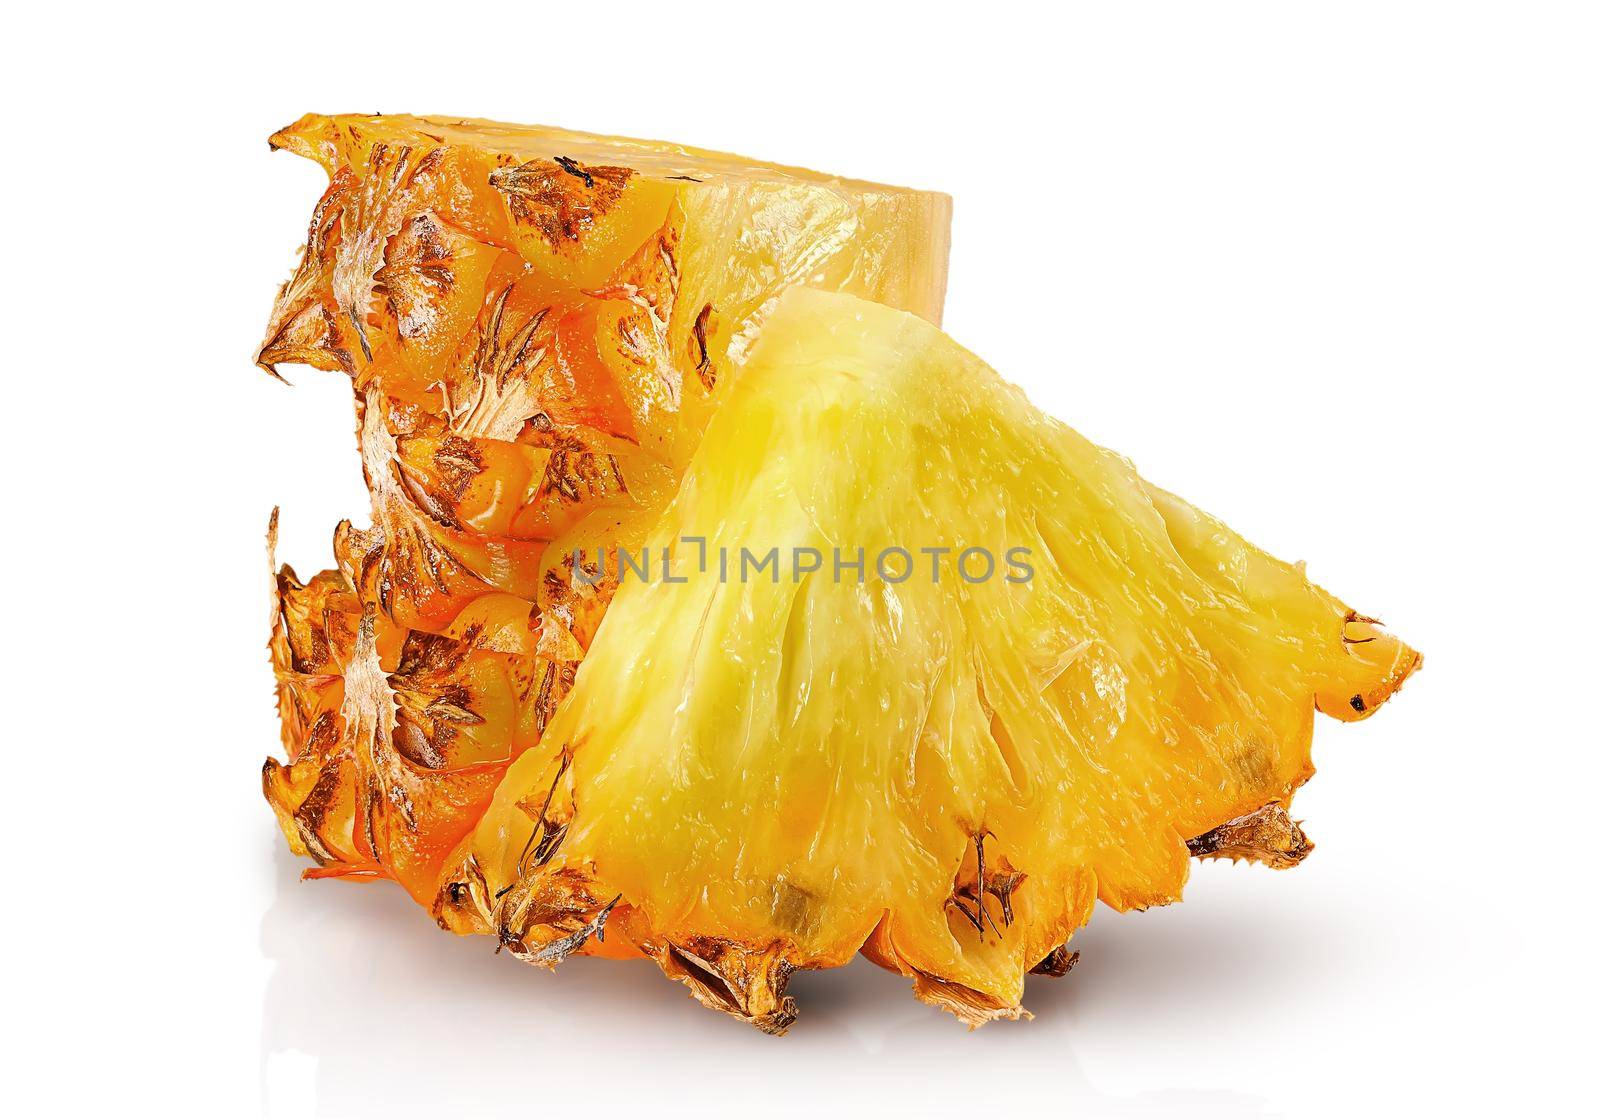 Several slices of pineapple in stack and one near isolated on white background